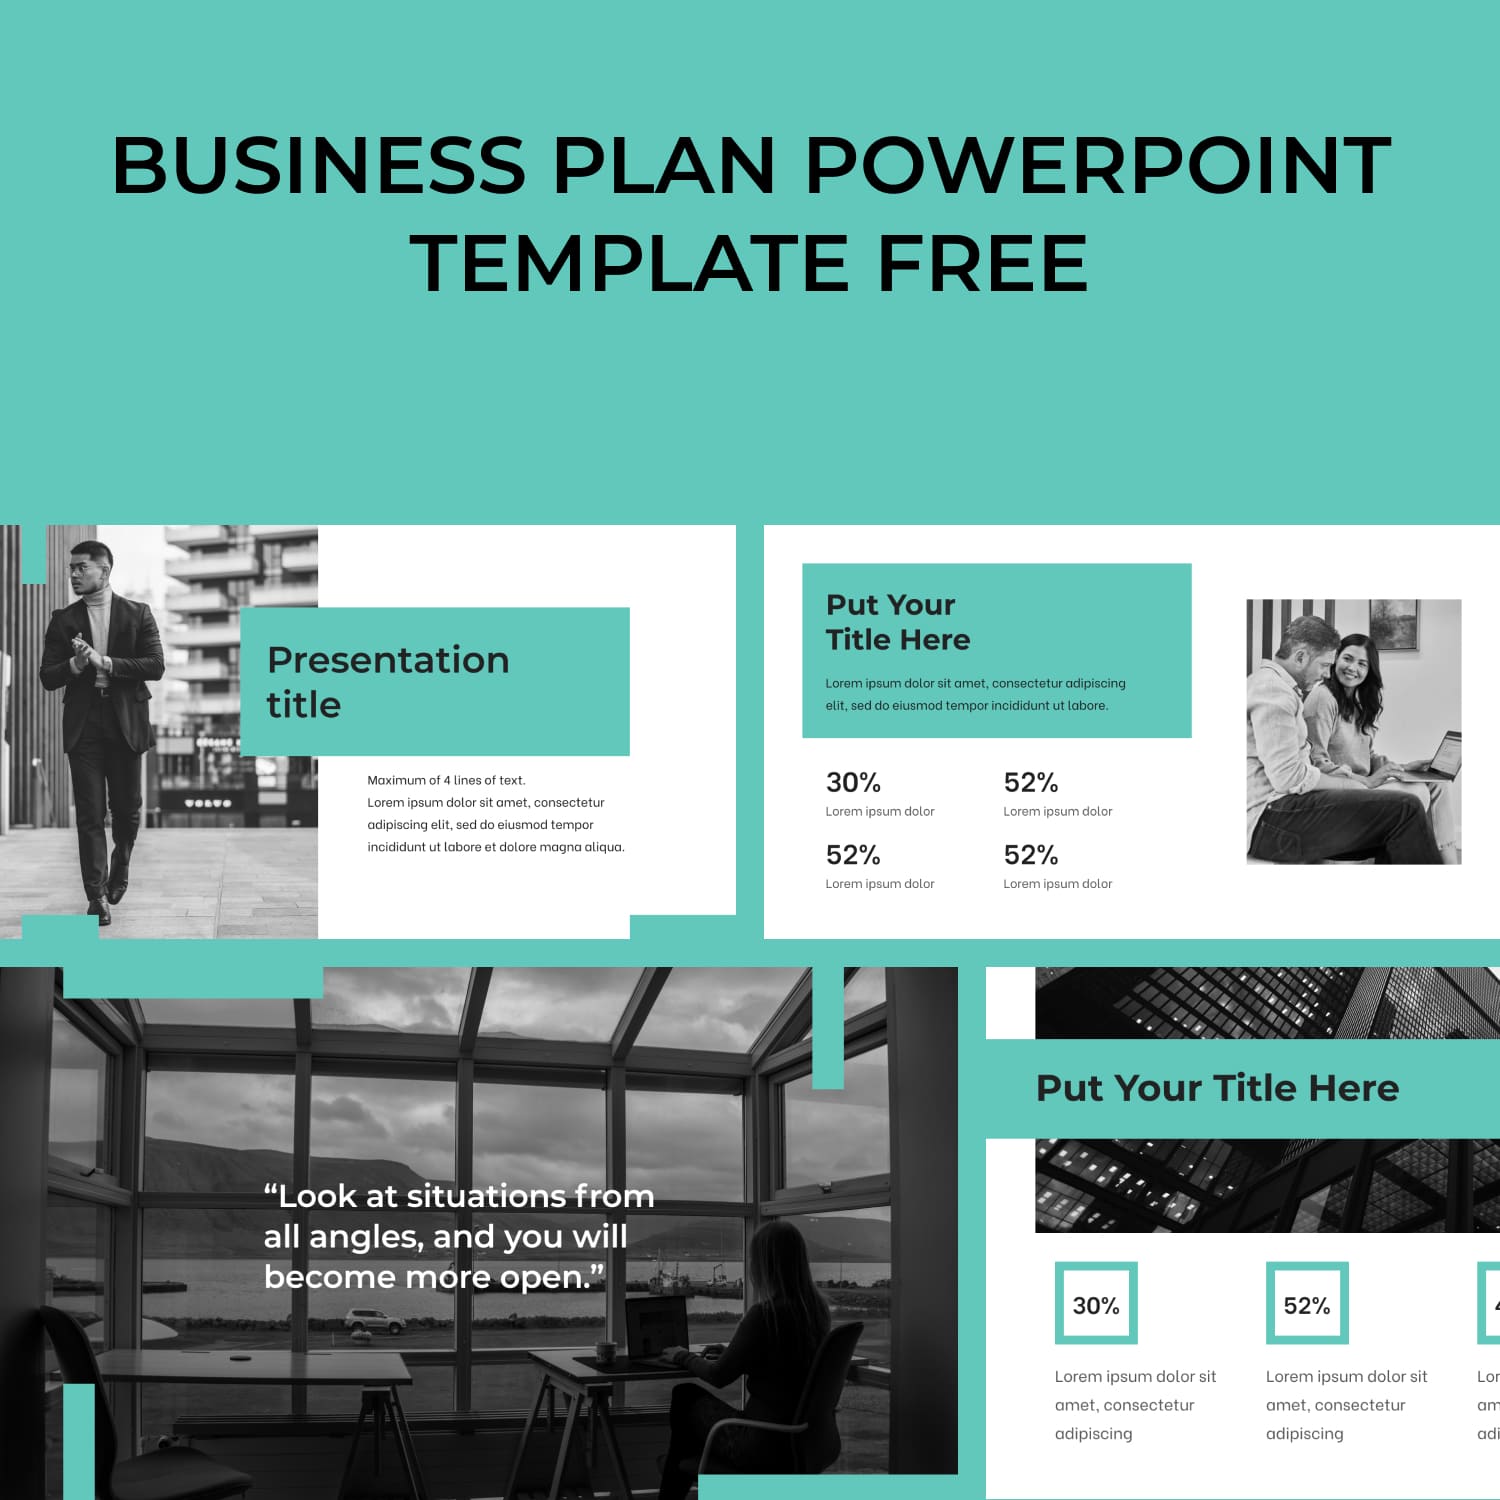 Business Plan Powerpoint Template Free 1500x1500 1.